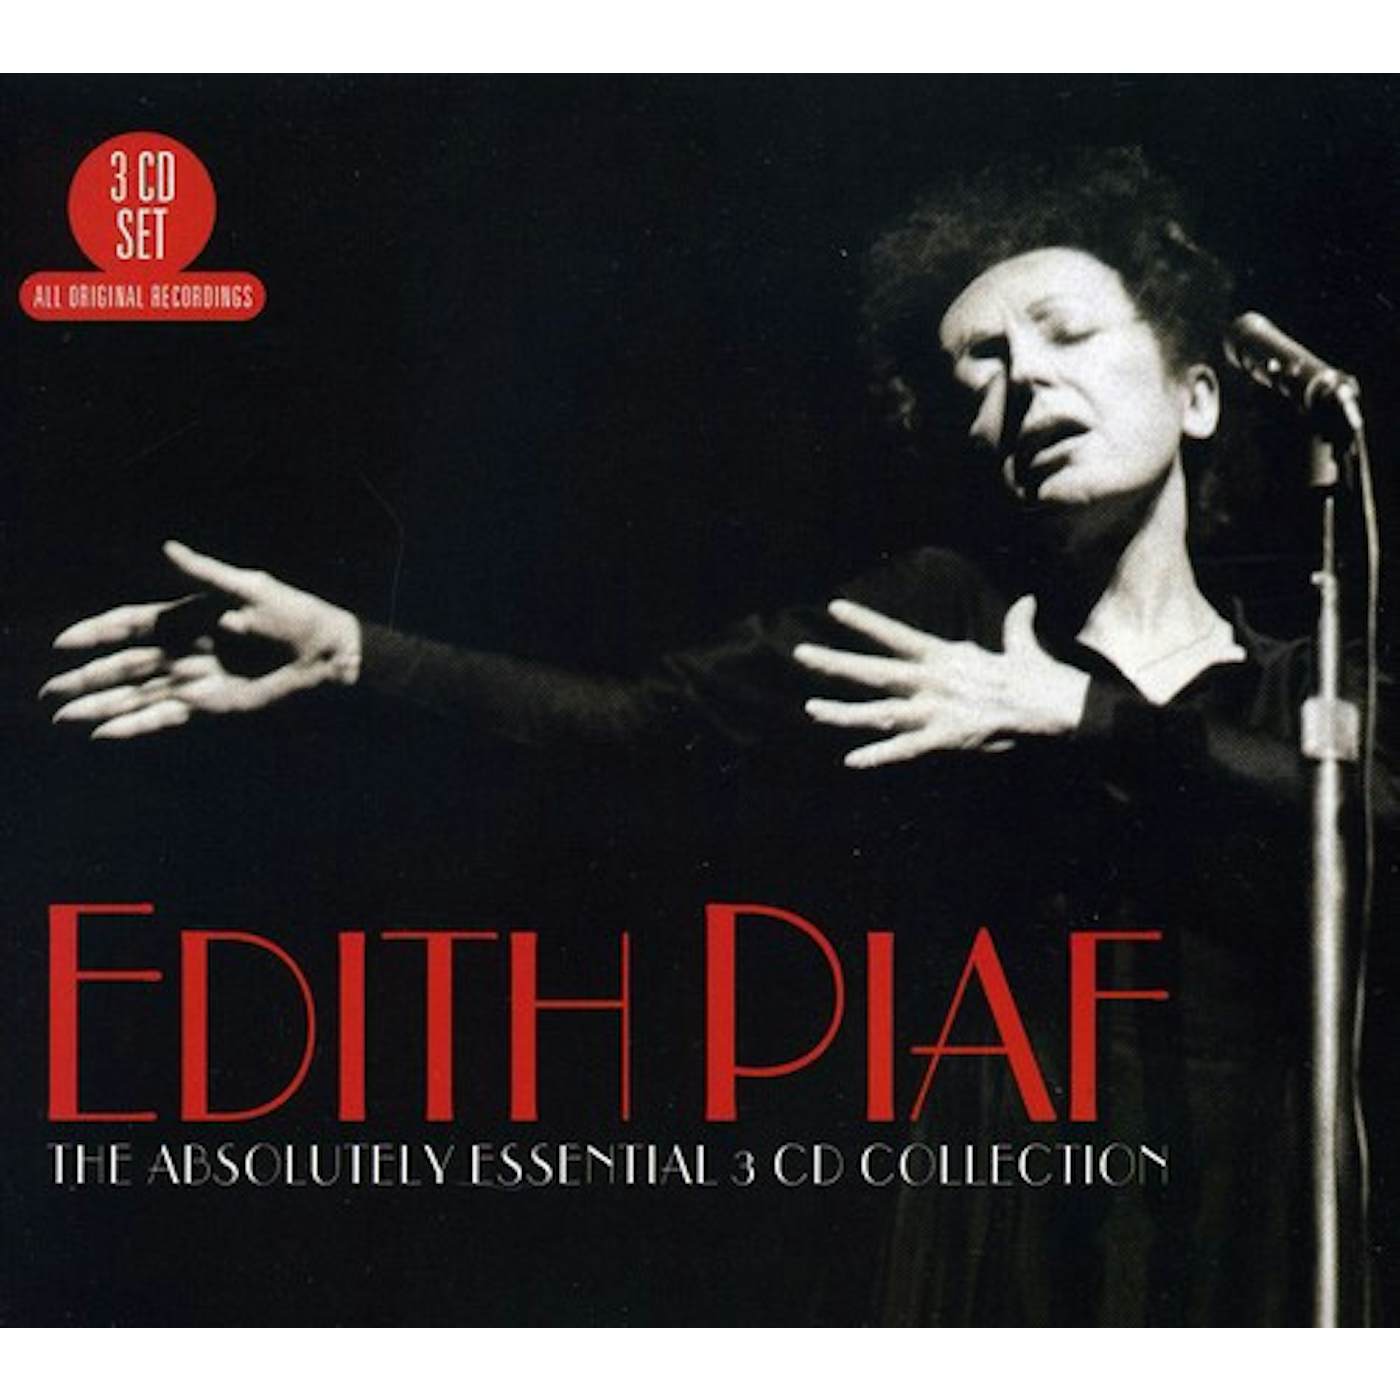 Édith Piaf ABSOLUTELY ESSENTIAL 3 CD COLLECTION CD